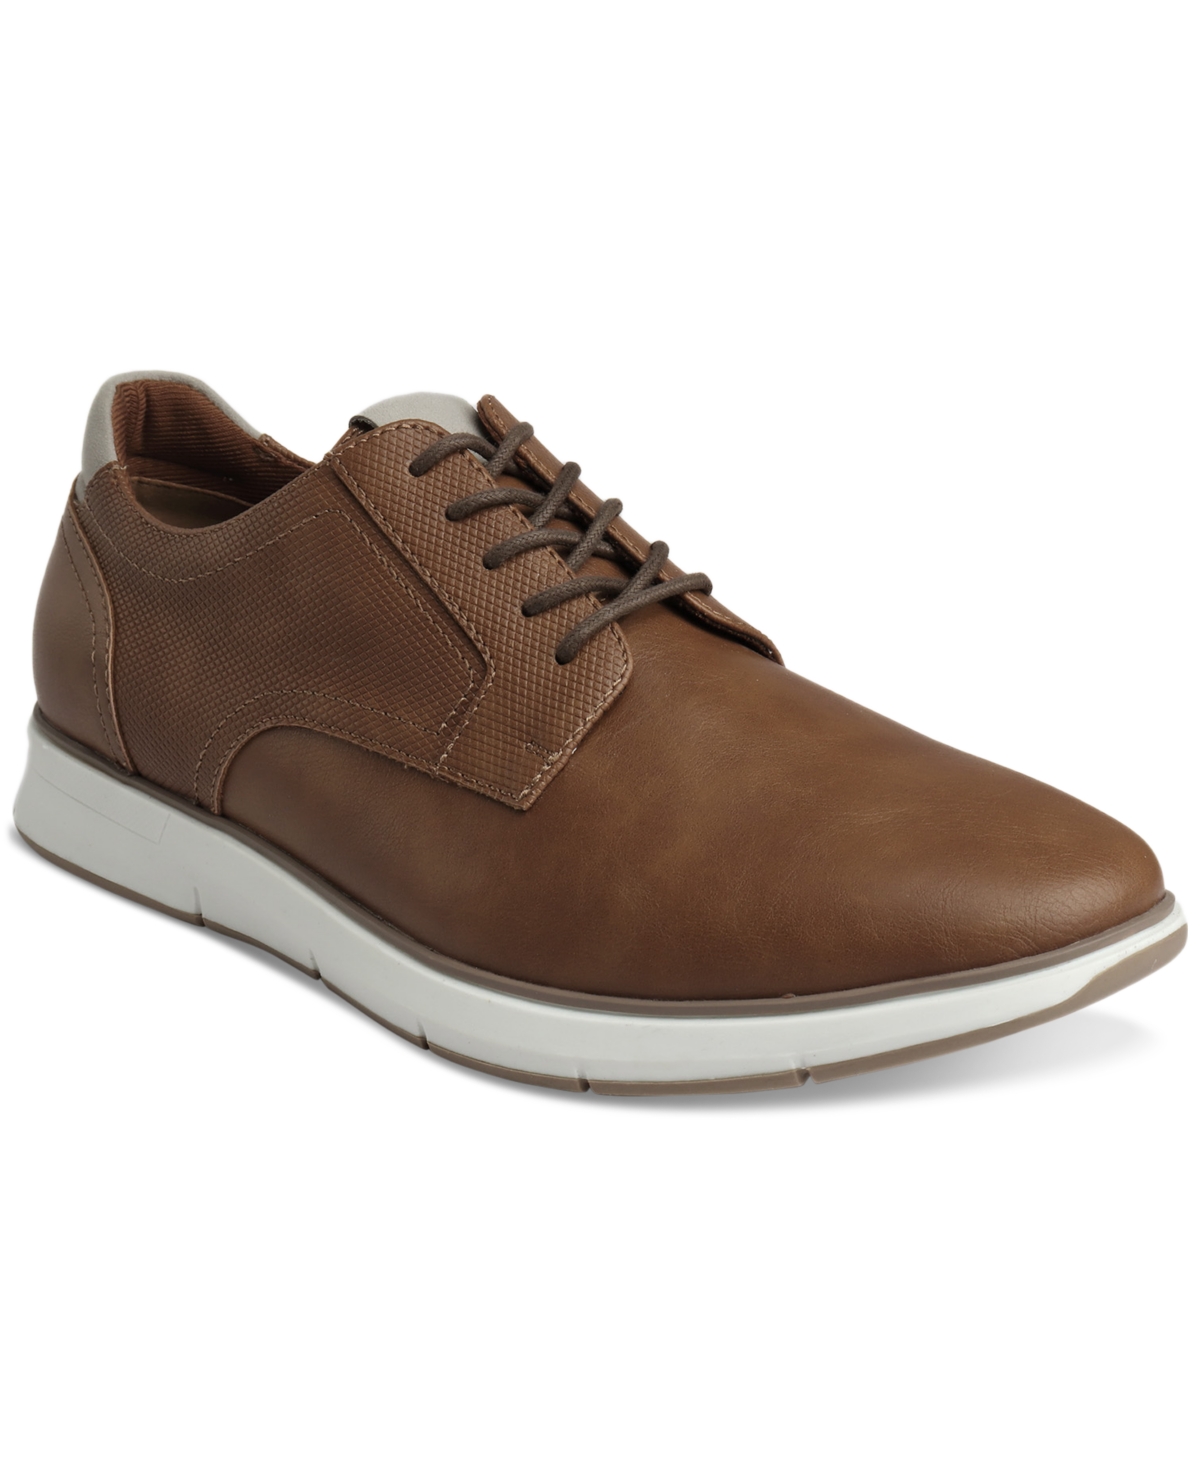 Men's Landan Faux-Leather Lace-Up Sneakers, Created for Macy's - Brown